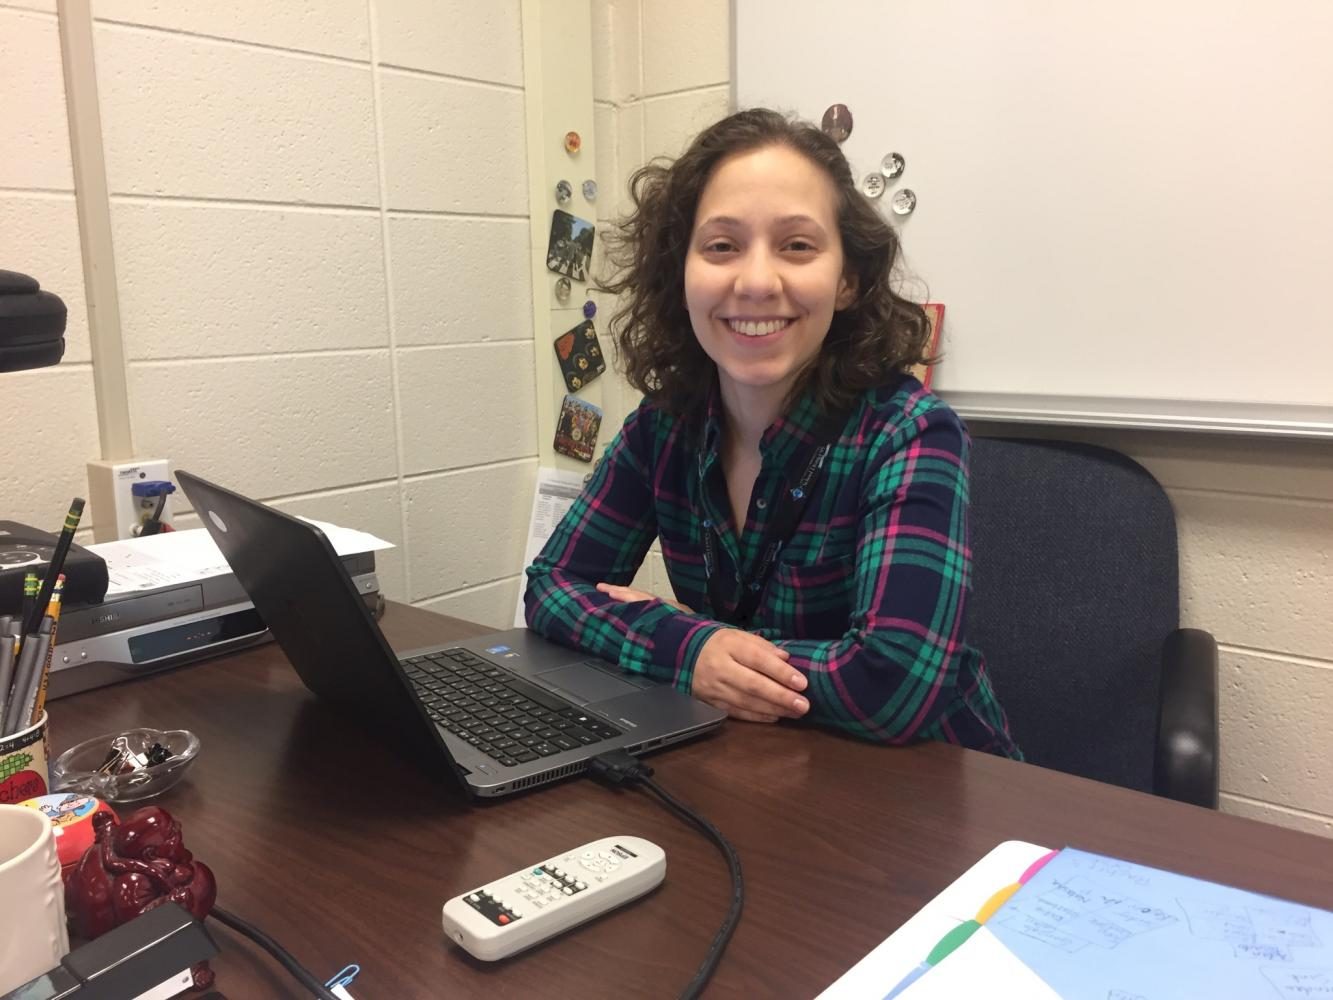 Kim Ferraro, new social studies teacher, graduated from University of Illinois in 2015. Standing 4 feet and 11 inches tall, Ferraro loves teaching, cooking, and watching Spongebob every Saturday morning.